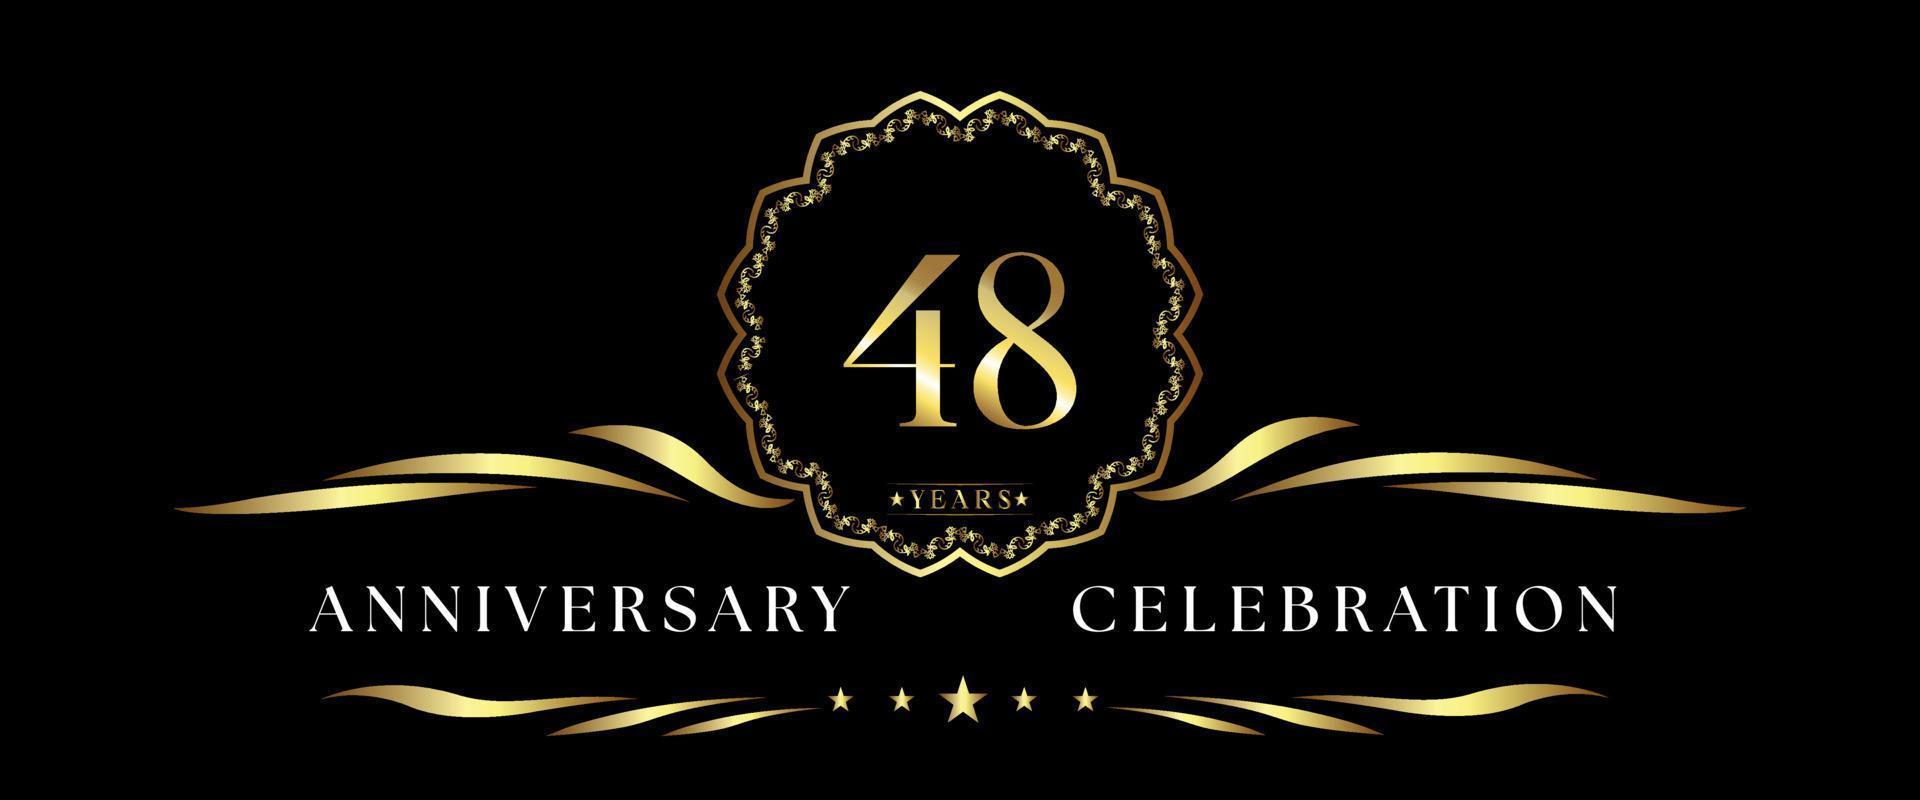 48 years anniversary celebration with gold decorative frame isolated on black background. Vector design for greeting card, birthday party, wedding, event party, ceremony. 48 years Anniversary logo.